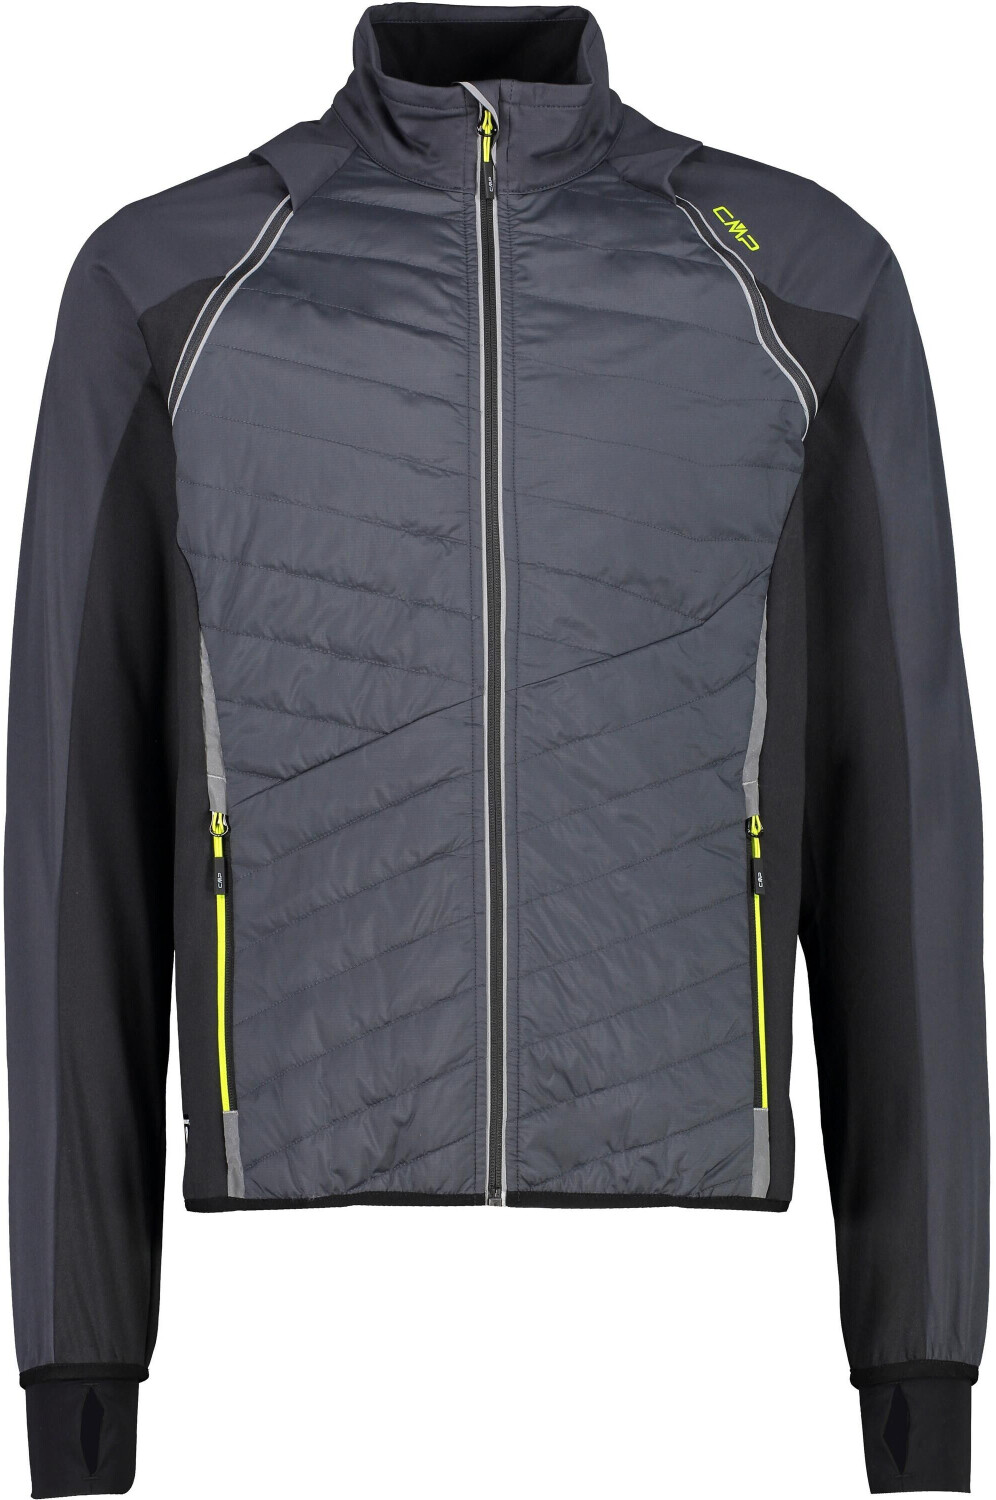 Buy CMP Men's Unlimitech Hybrid jacket with Removable Sleeves from £51.50  (Today) – Best Deals on